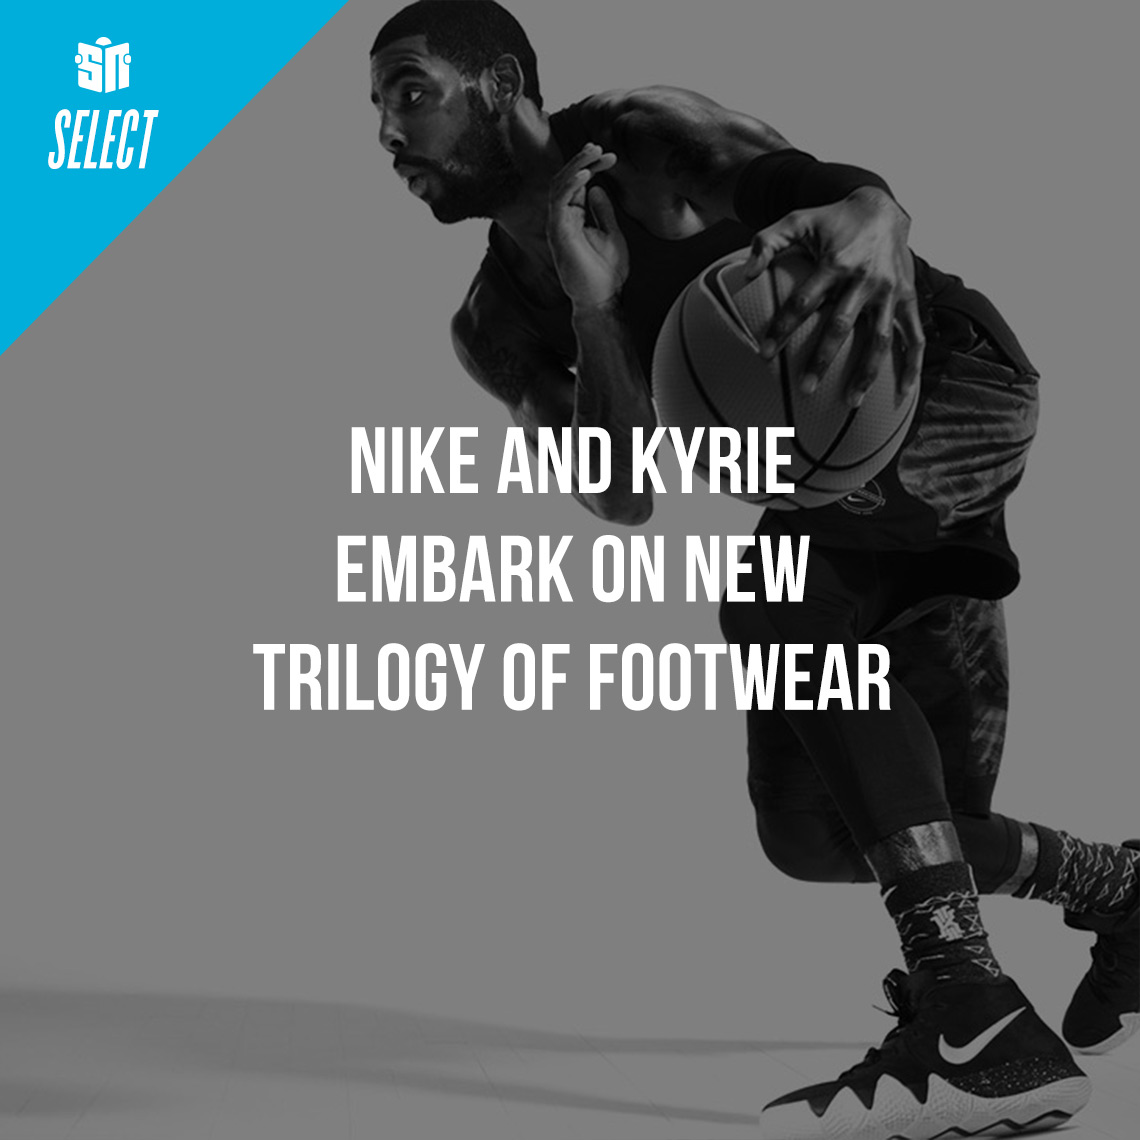 Kyrie Irving And Ben Nethongkome Embark On New Trilogy With The volt Nike Kyrie 4